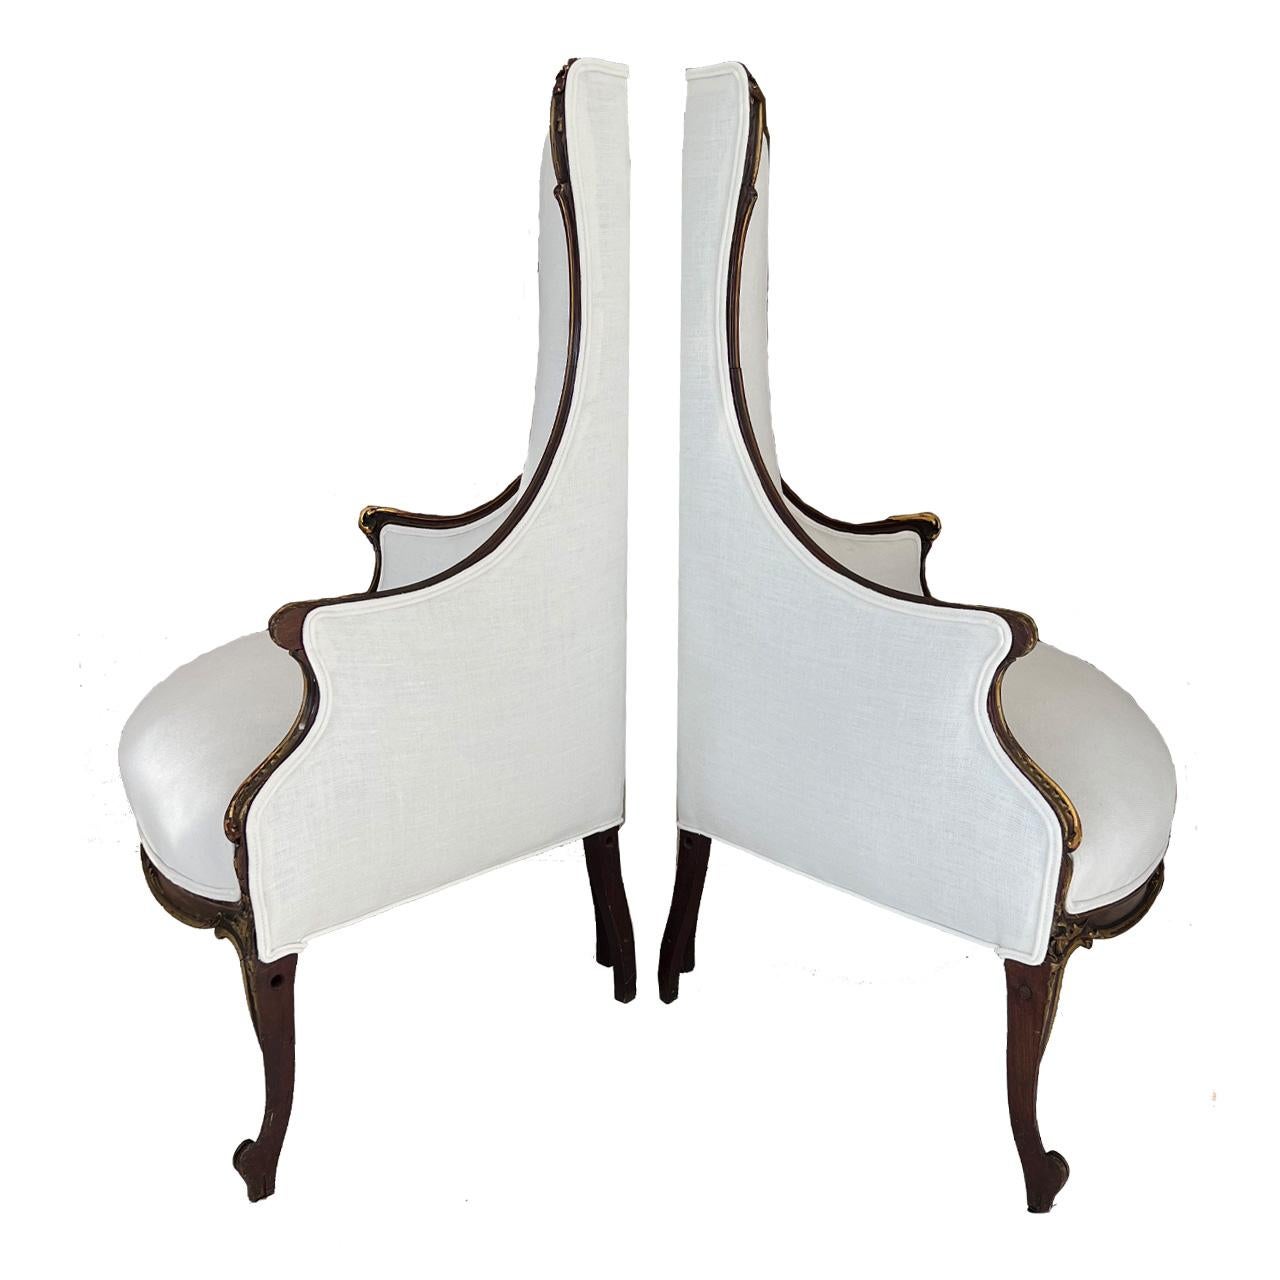 Corner chairs that demand attention. Wood with gilded accents and new white Belgian linen upholstery make these chairs a stand out.